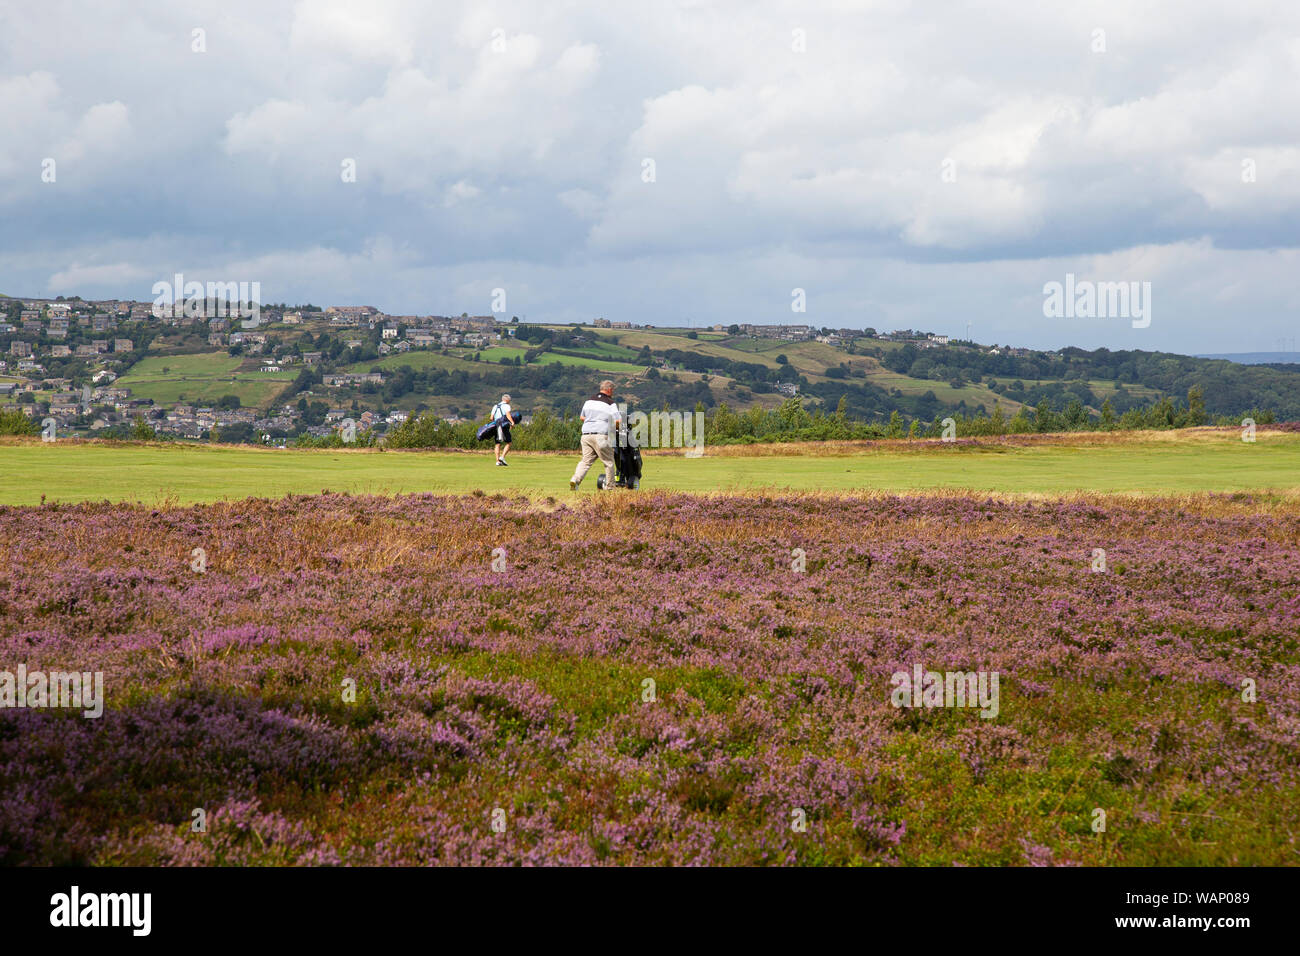 Golfers on a heathland course in West Yorkshire with the heather uplands in full bloom in late summer Stock Photo